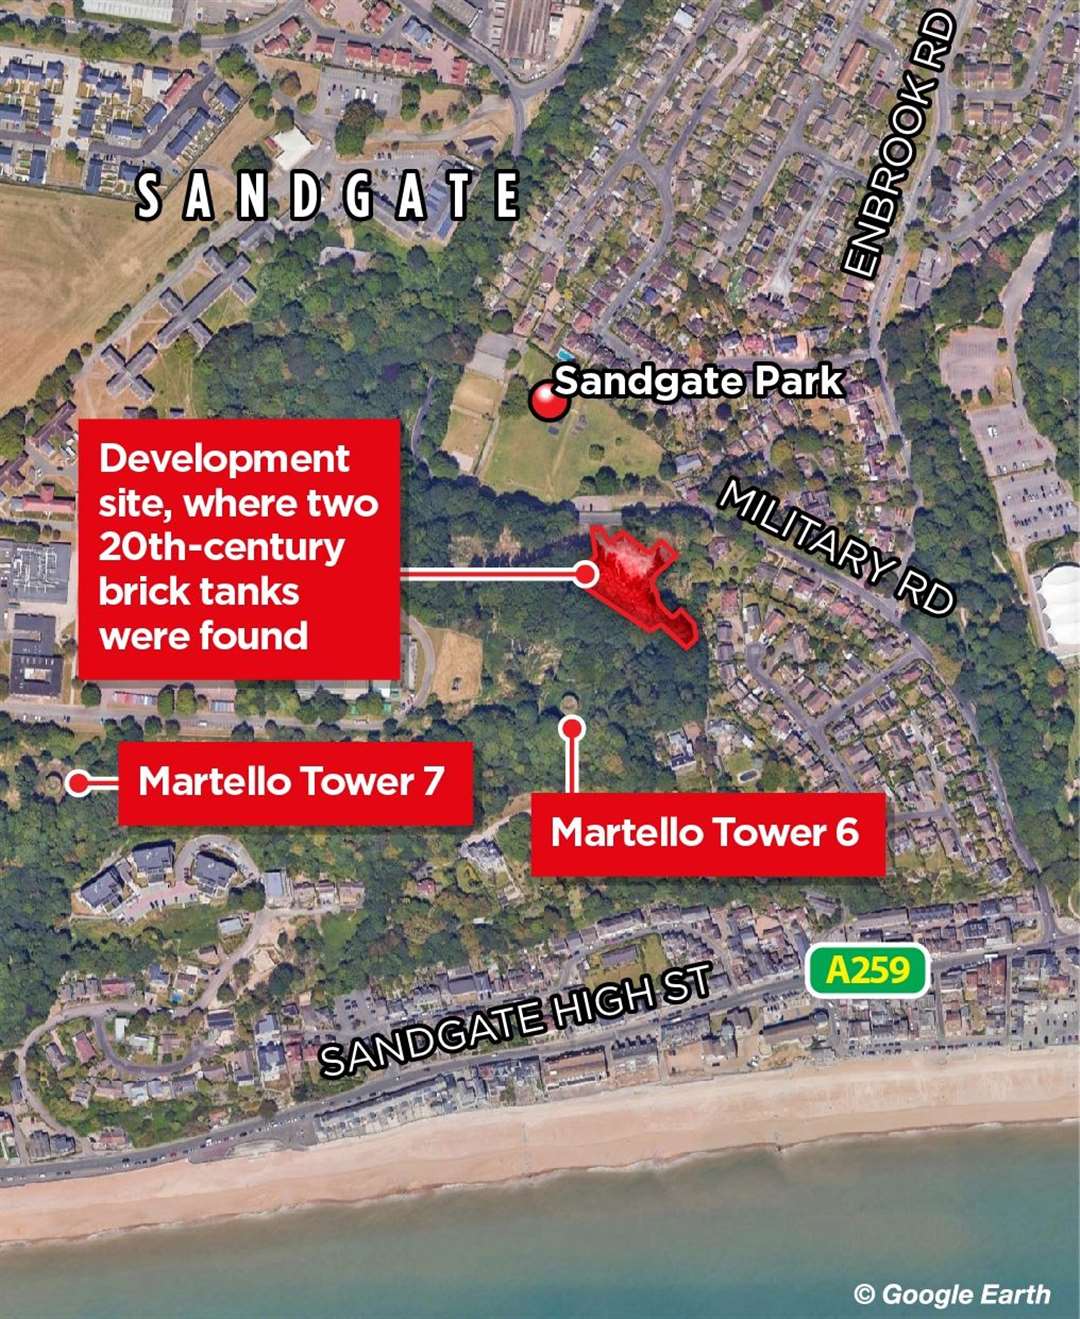 Five homes will be built and two nearby Martello towers will be renovated